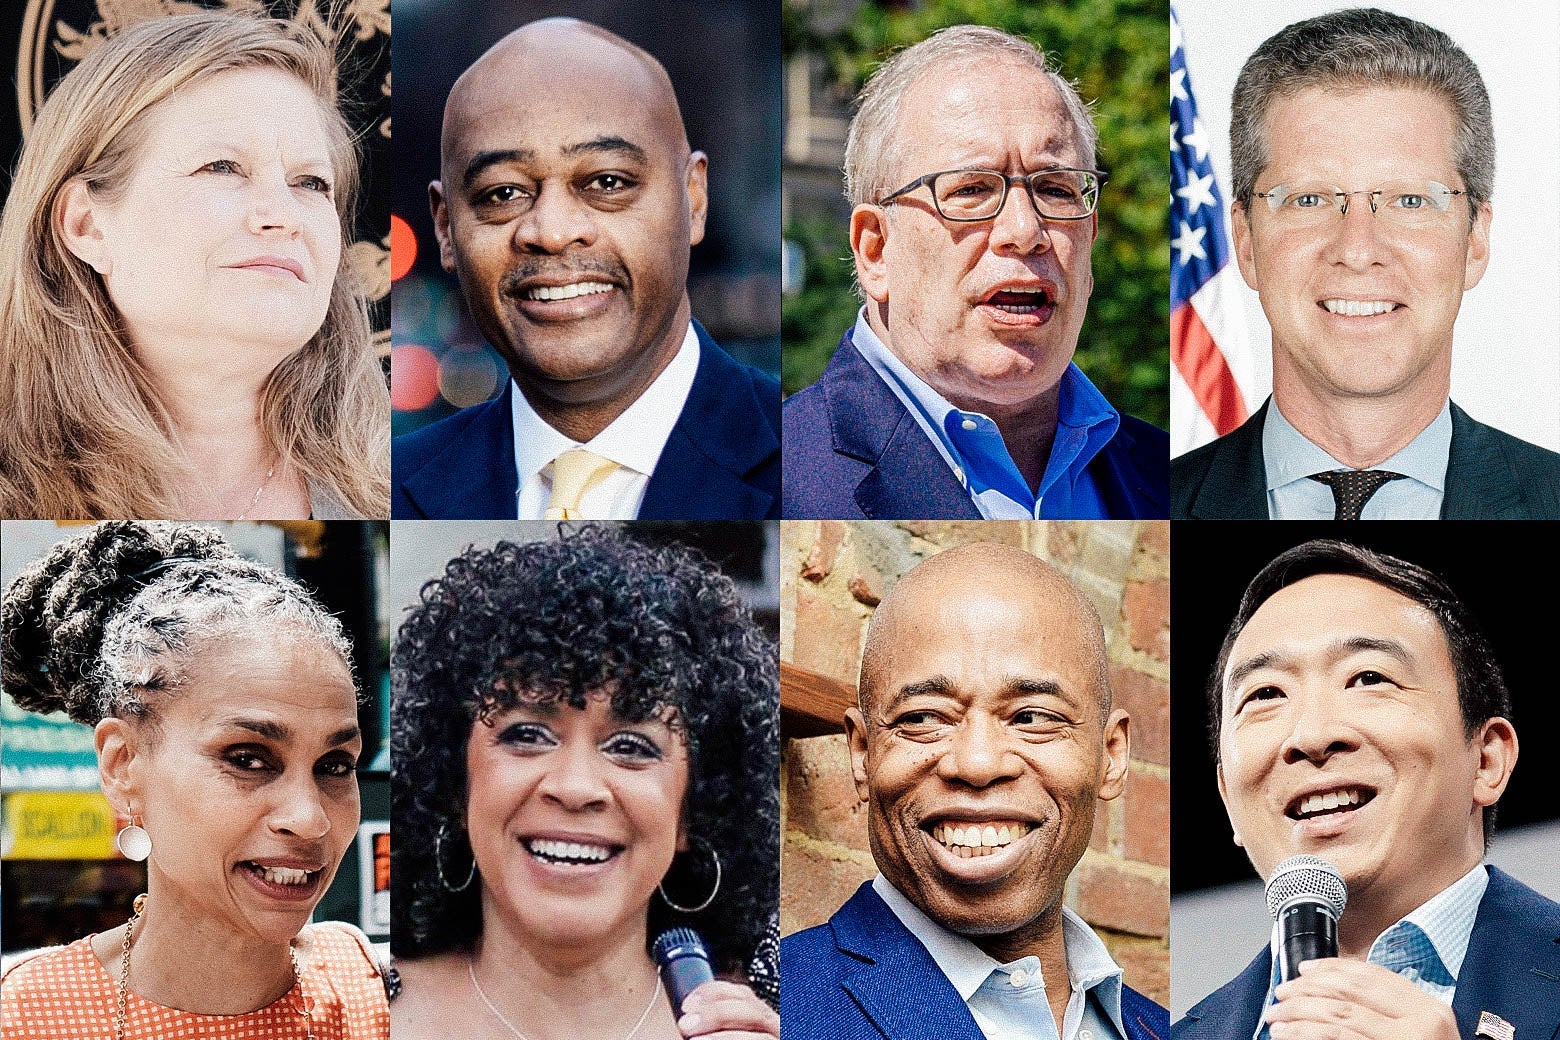 New York City Democratic mayoral candidates, clockwise from top left: Kathryn Garcia, Ray McGuire, Scott Stringer, Shaun Donovan, Andrew Yang, Eric Adams, Dianne Morales, and Maya Wiley.